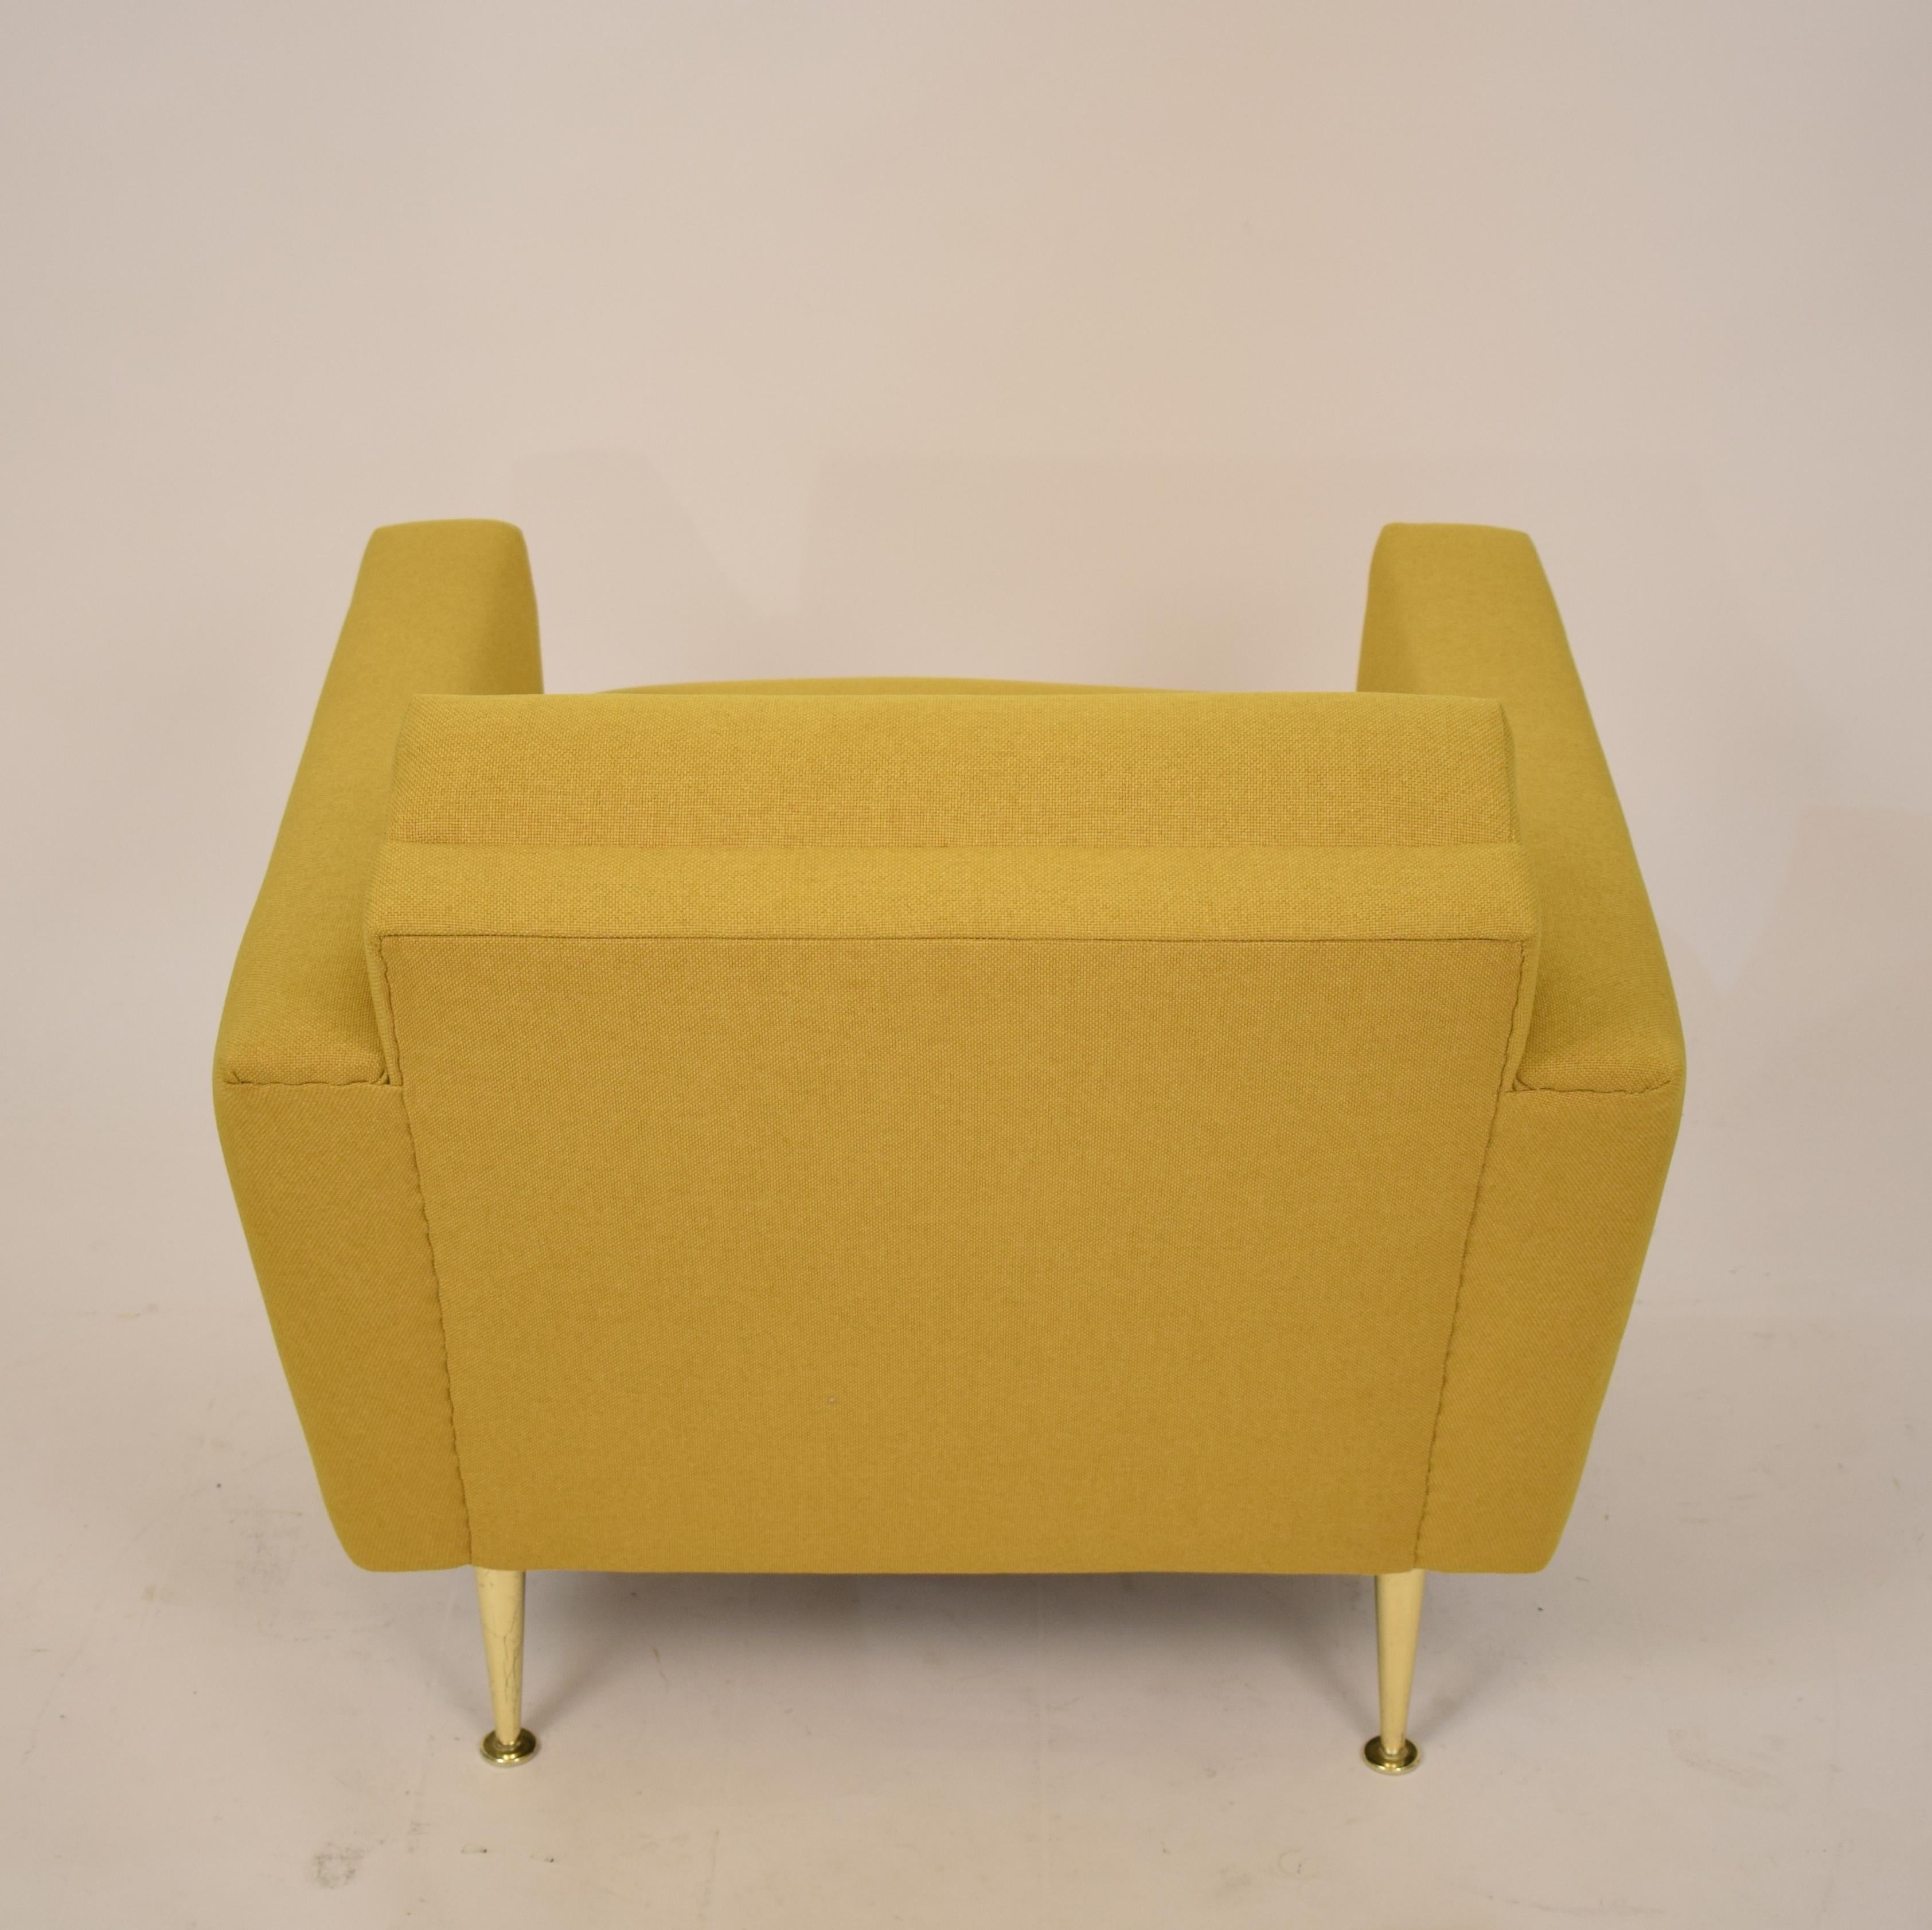 Midcentury German Yellow and Brass Lounge Chair Armchair Pierre Guariche Style 7